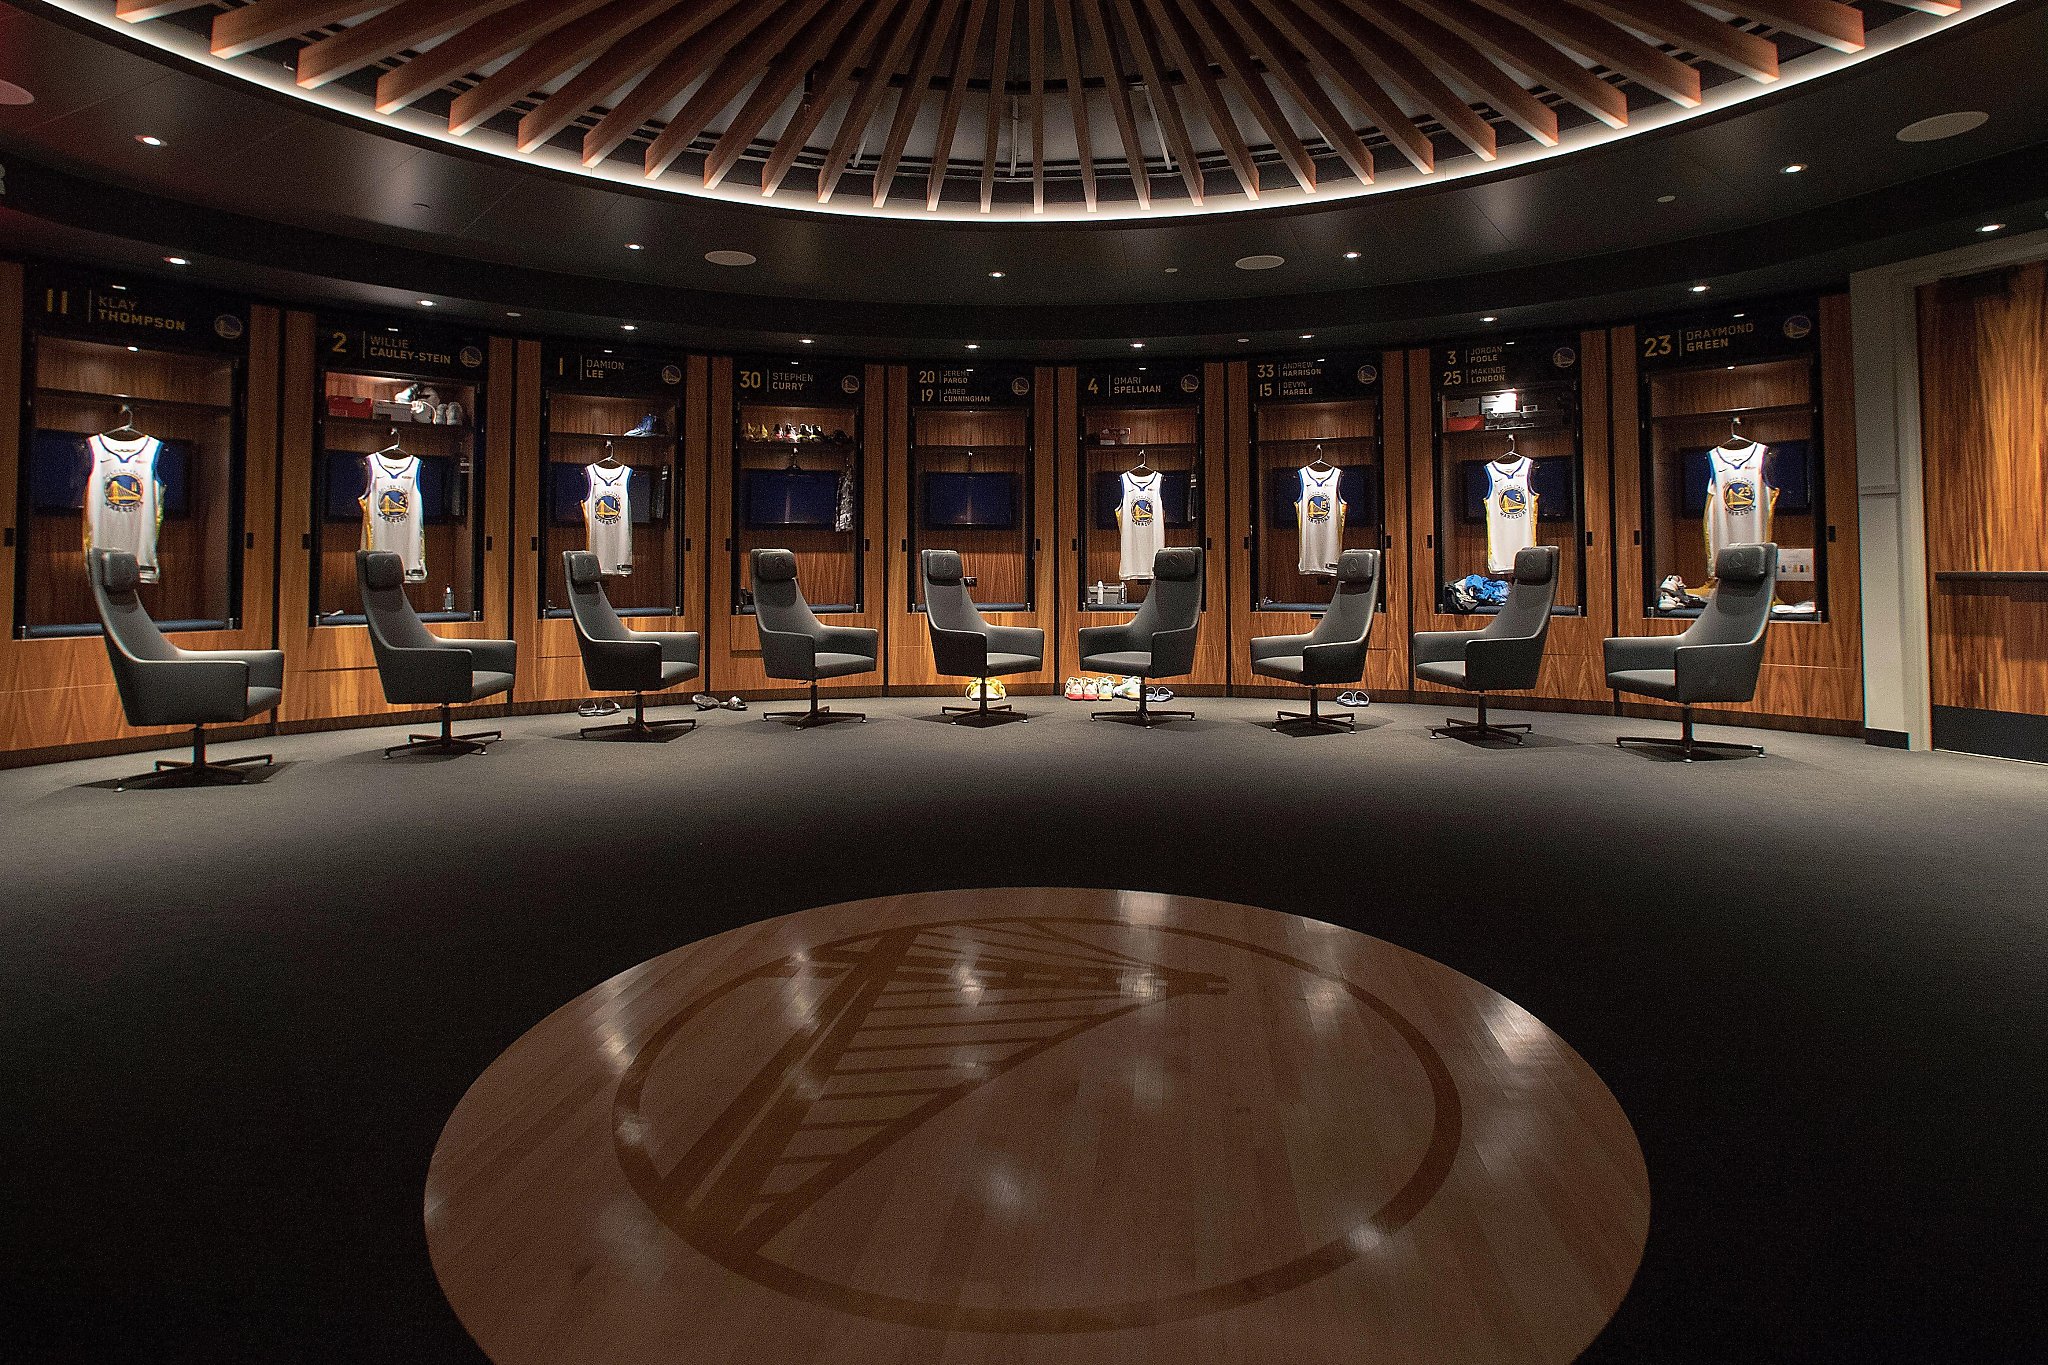 Inside the Warriors' locker room after the championship